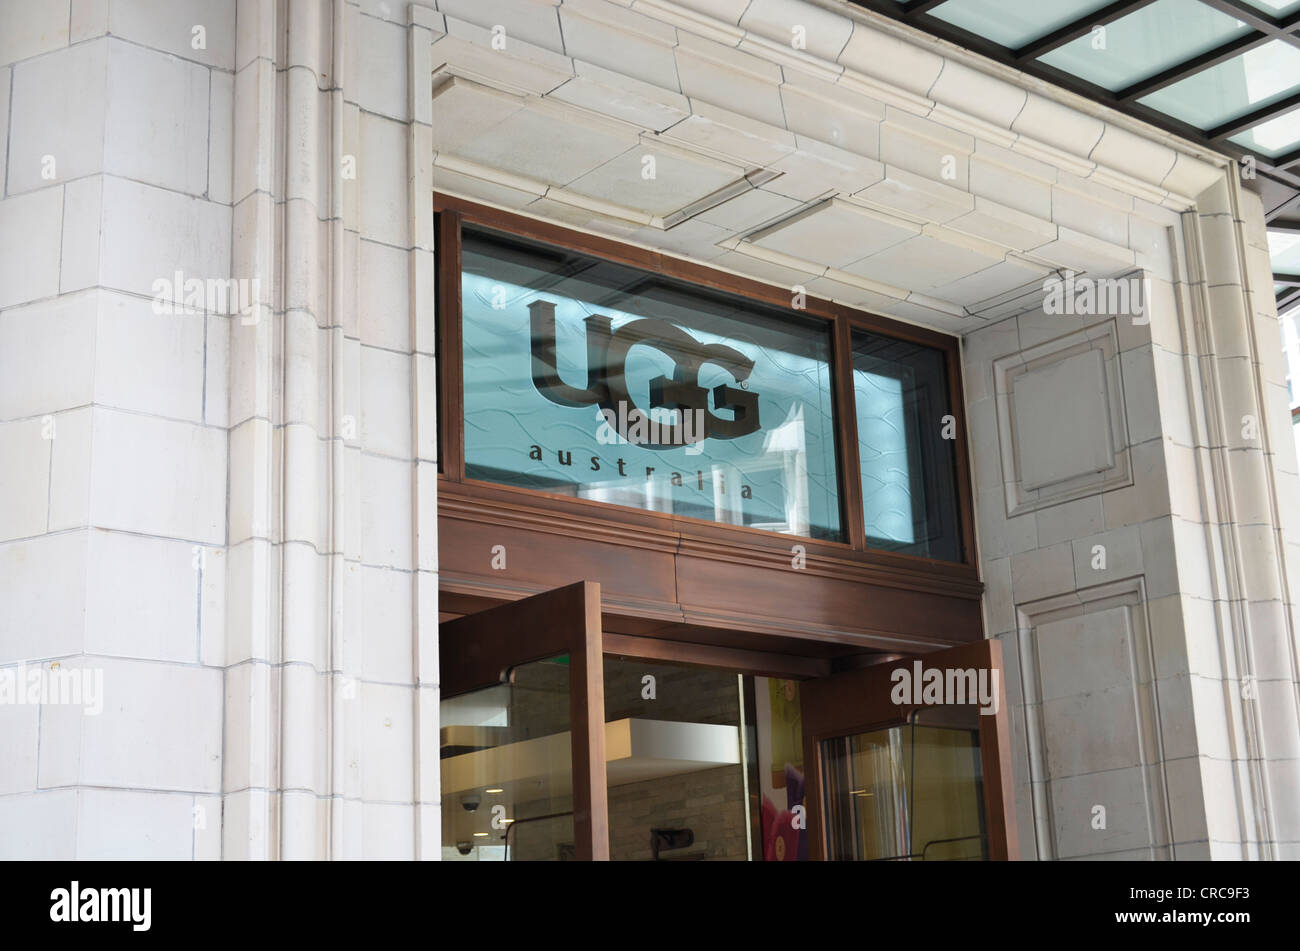 Ugg Store High Resolution Stock Photography and Images - Alamy